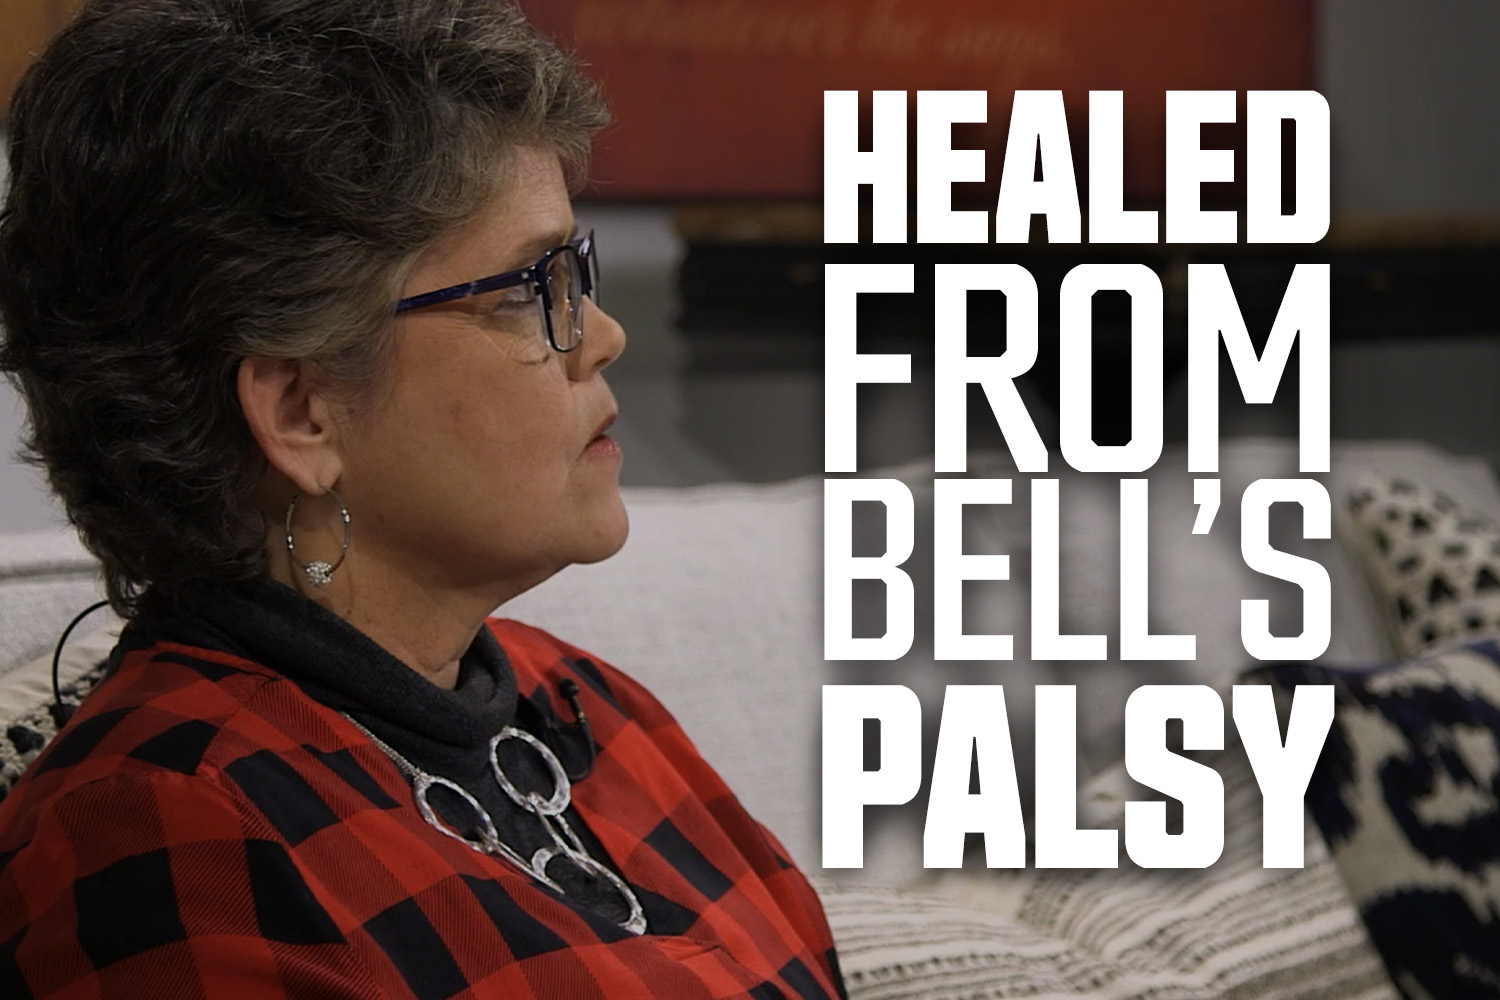 Healed From Bell's Palsy